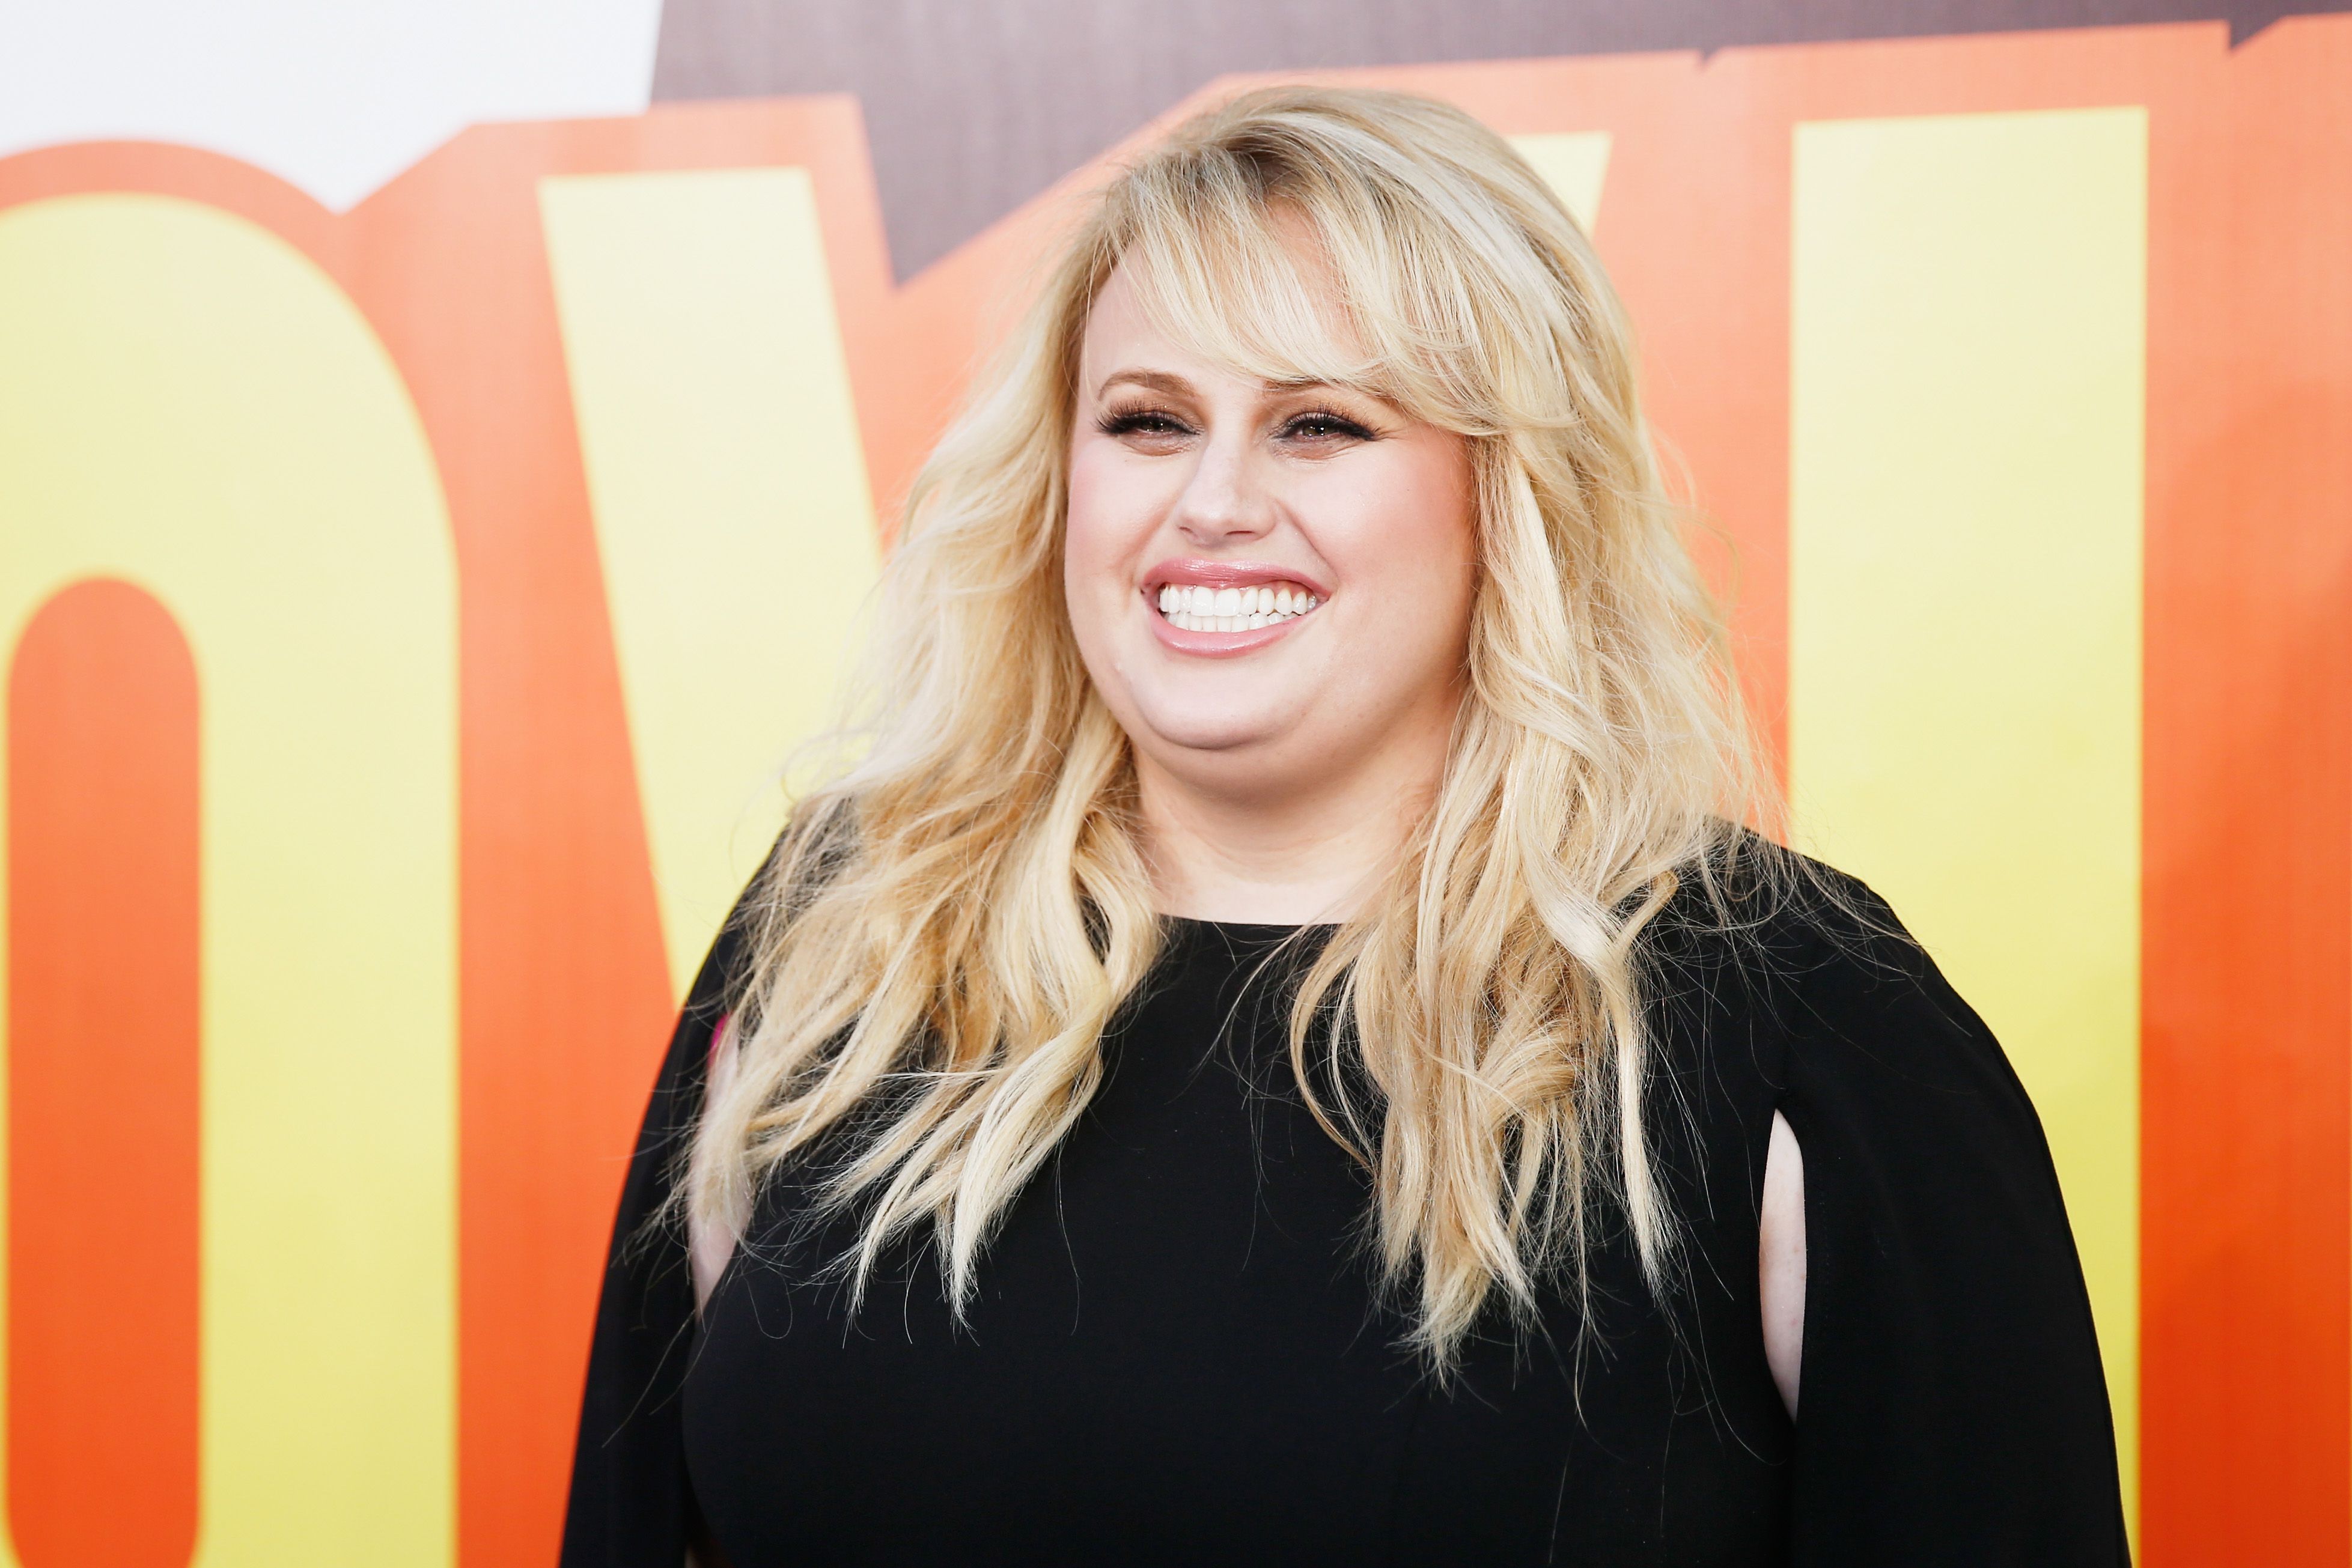 Rebel Wilson at The 2015 MTV Movie Awards at Nokia Theatre L.A. Live on April 12, 2015 | Photo: Getty Images